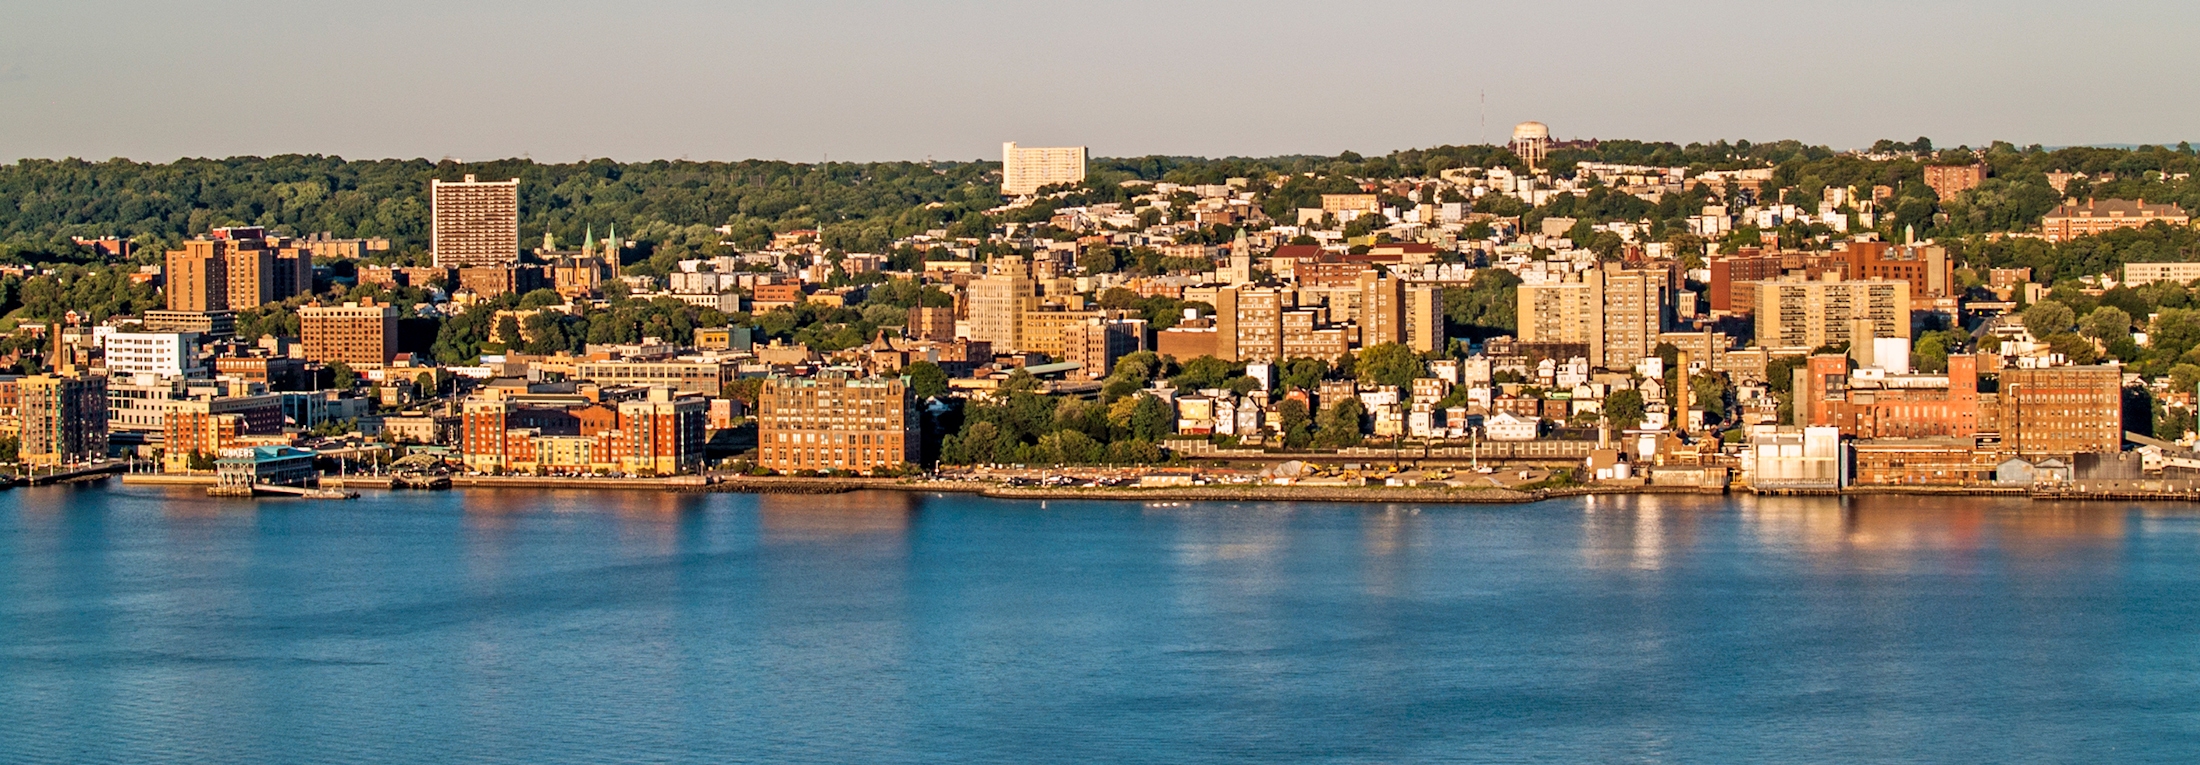 Overview of Yonkers, NY